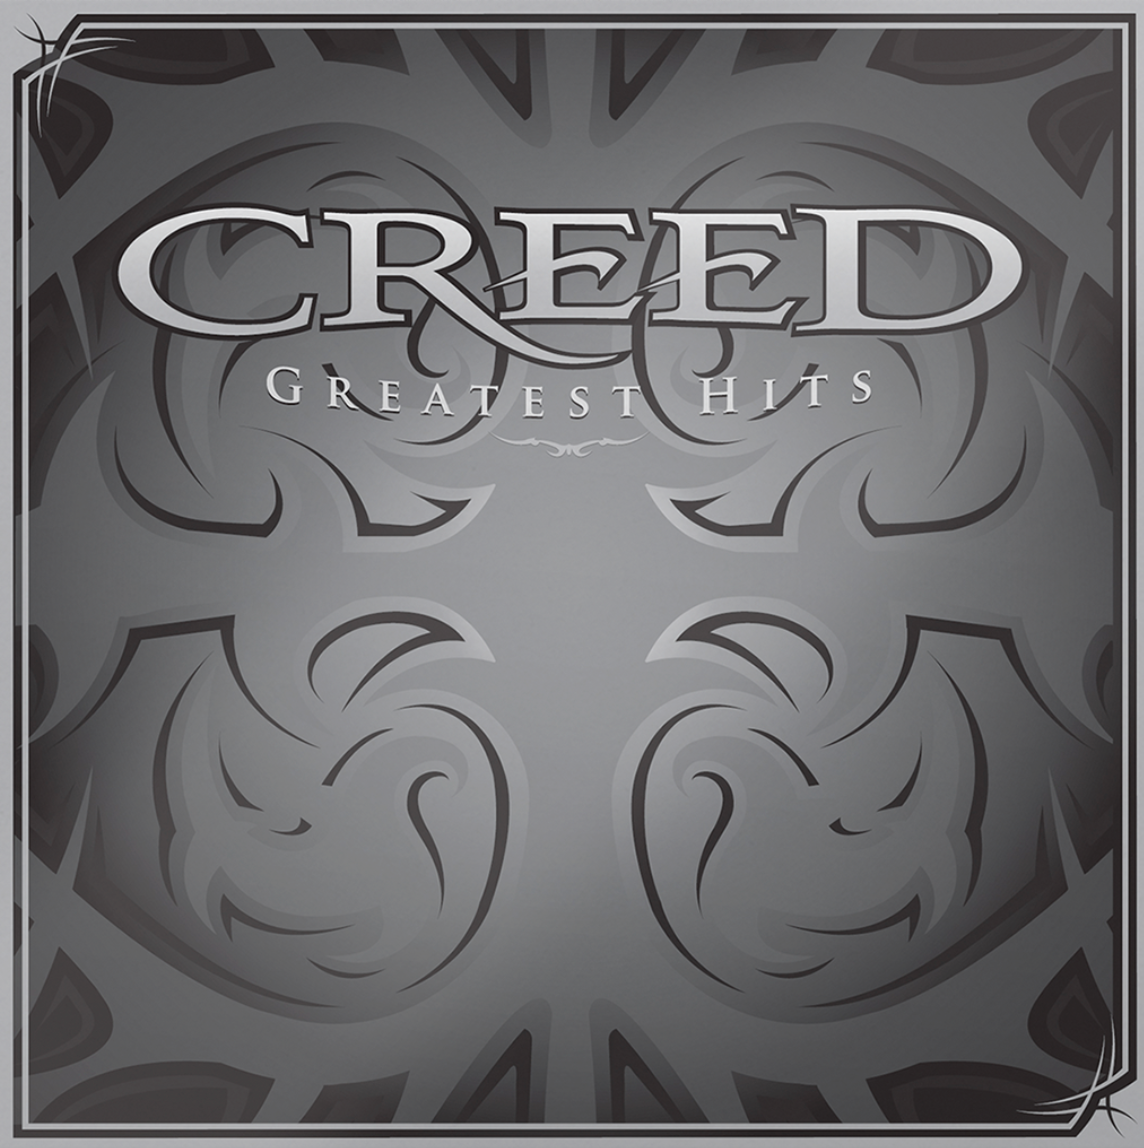 CREED’S MULTI-PLATINUM-SELLING GREATEST HITS MAKES ITS WIDE DEBUT ON VINYL